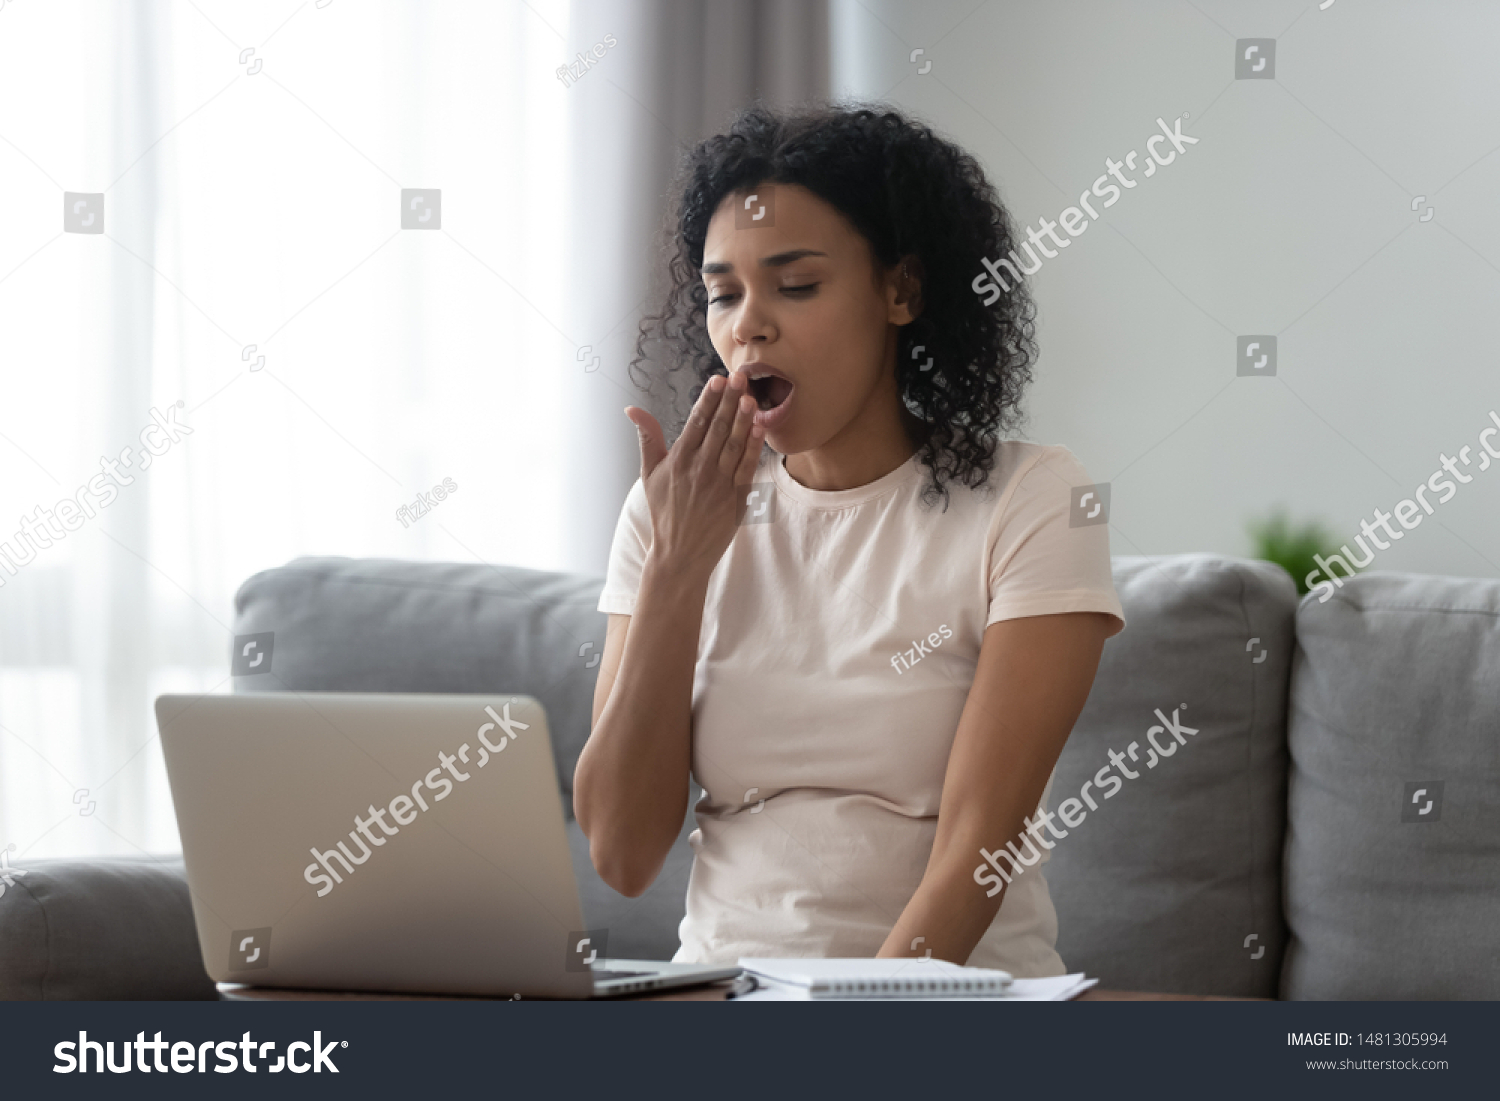 Tired african American young woman sit on sofa yawn feel fatigue working long on laptop, exhausted black millennial girl sigh having sleep deprivation, overwhelmed with computer studying at home #1481305994